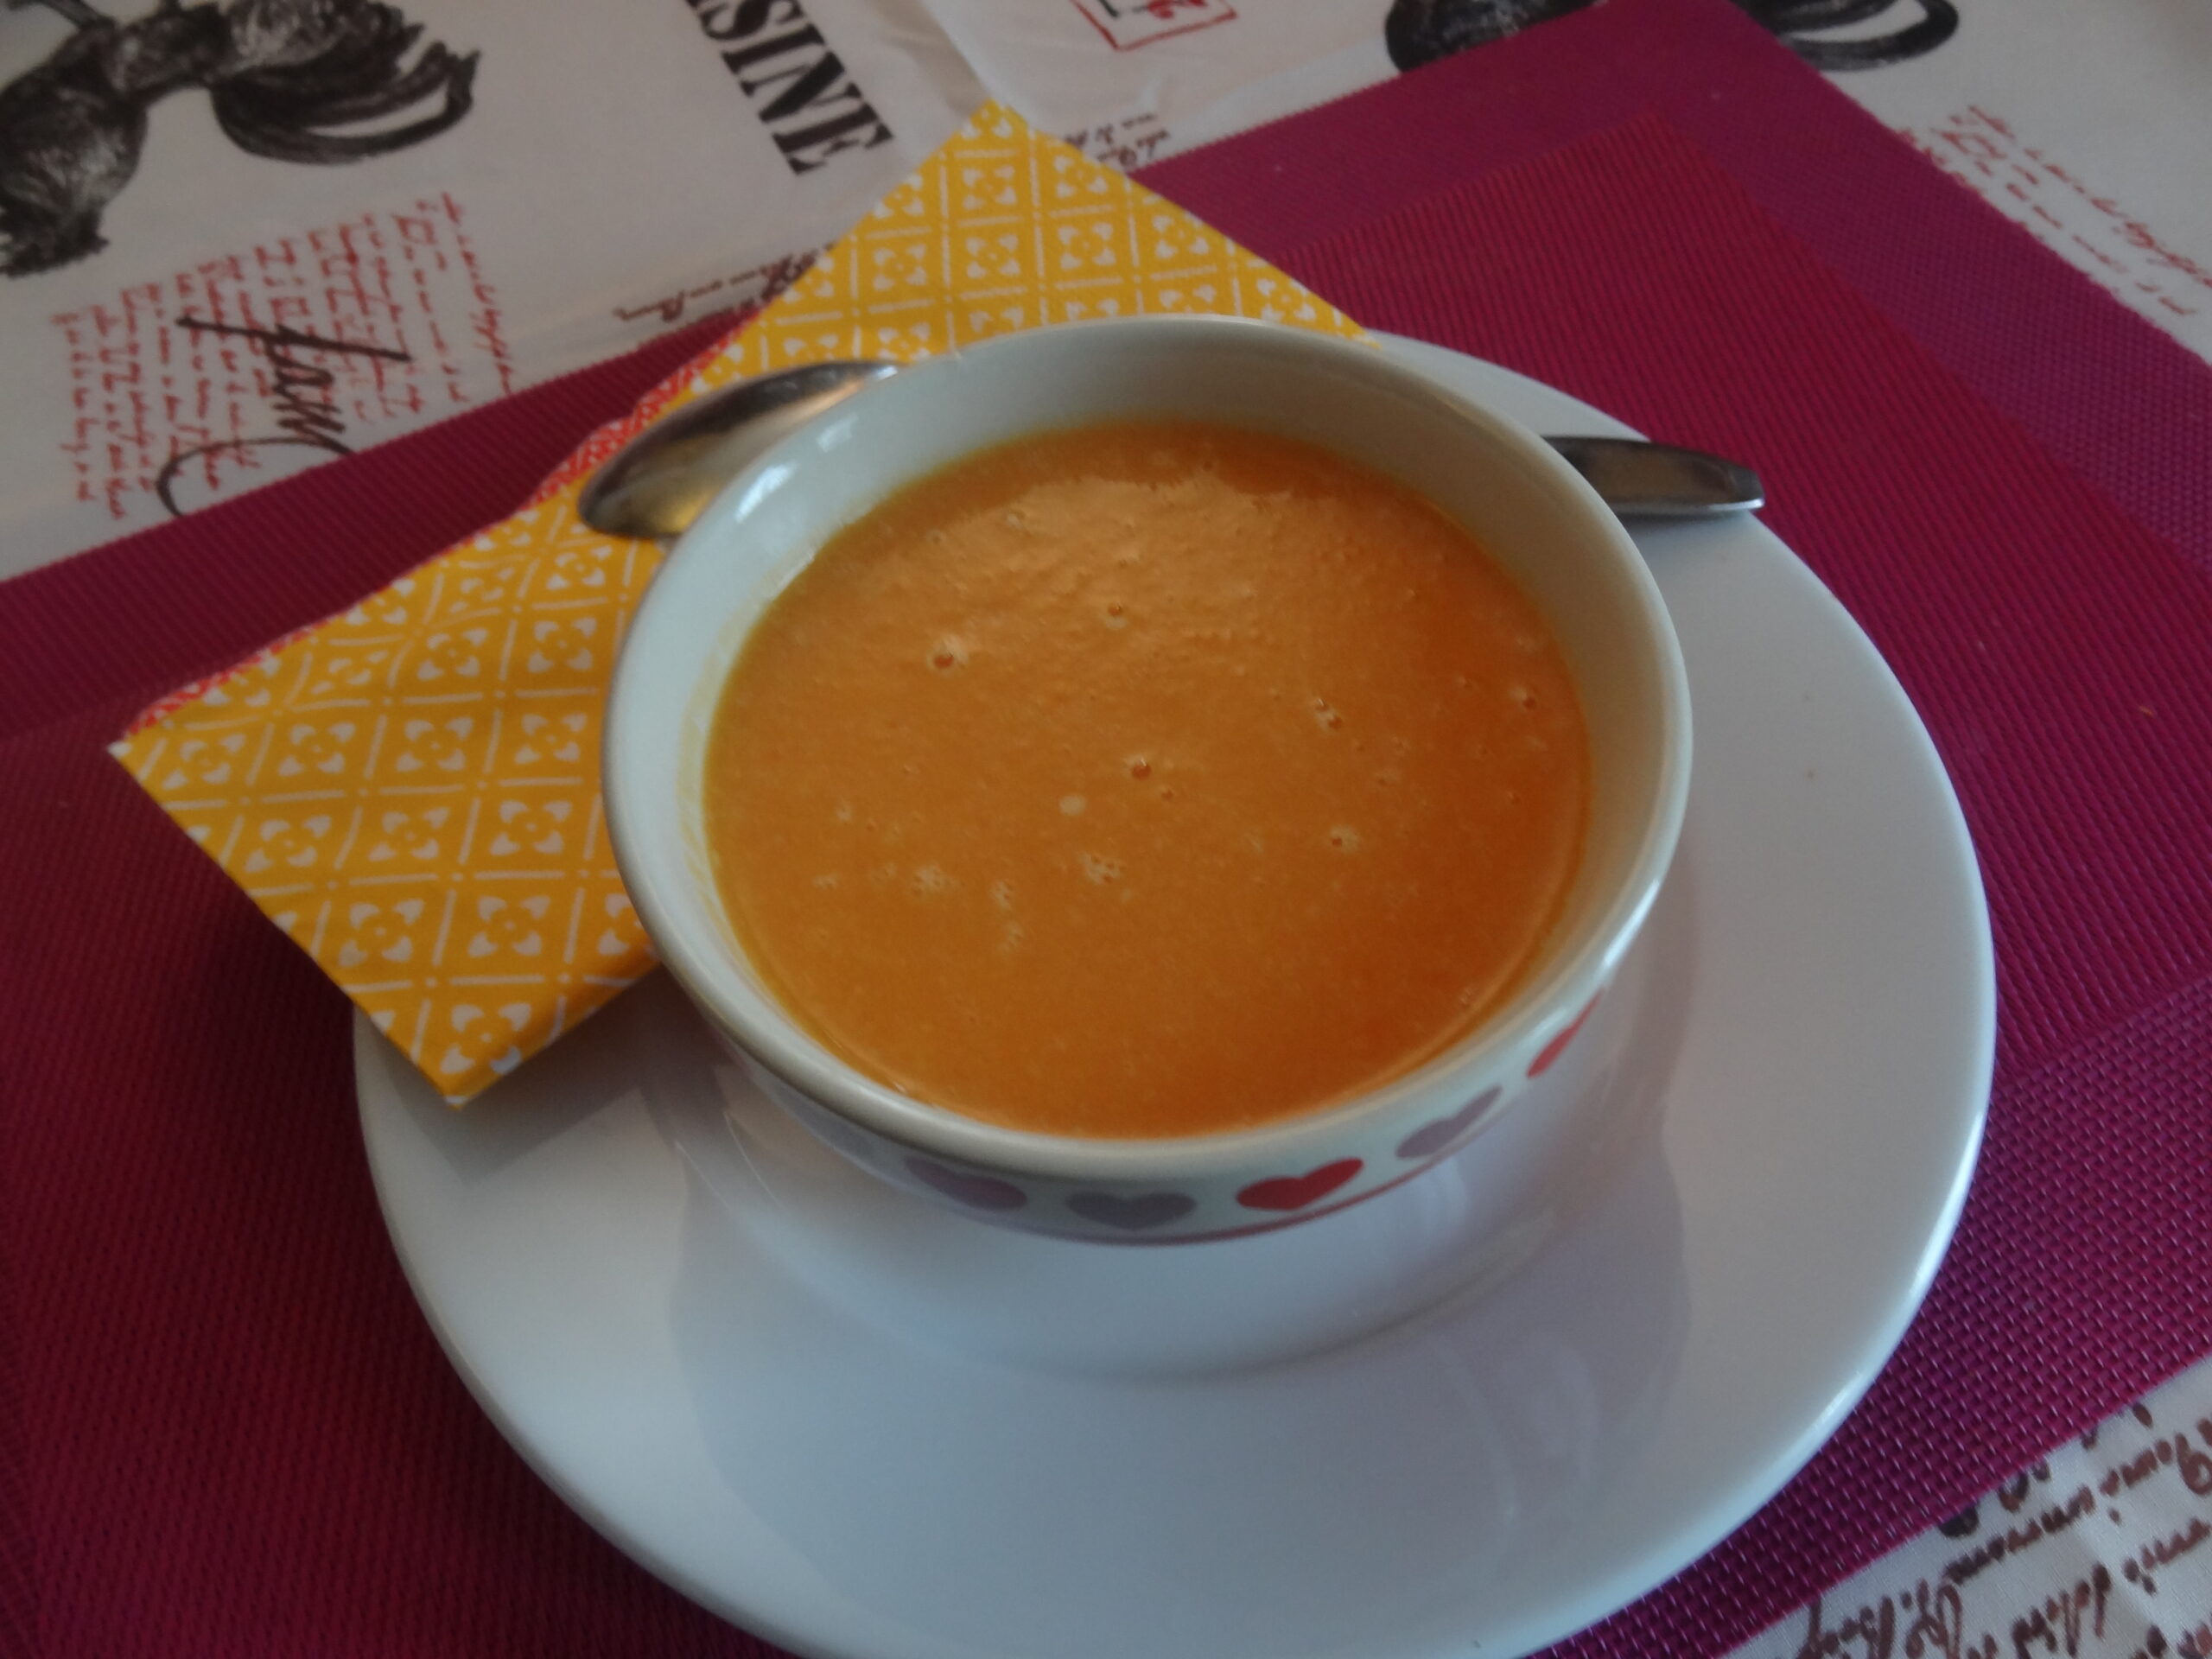 You are currently viewing POTAGE ORANGE SAVEUR NOISETTE